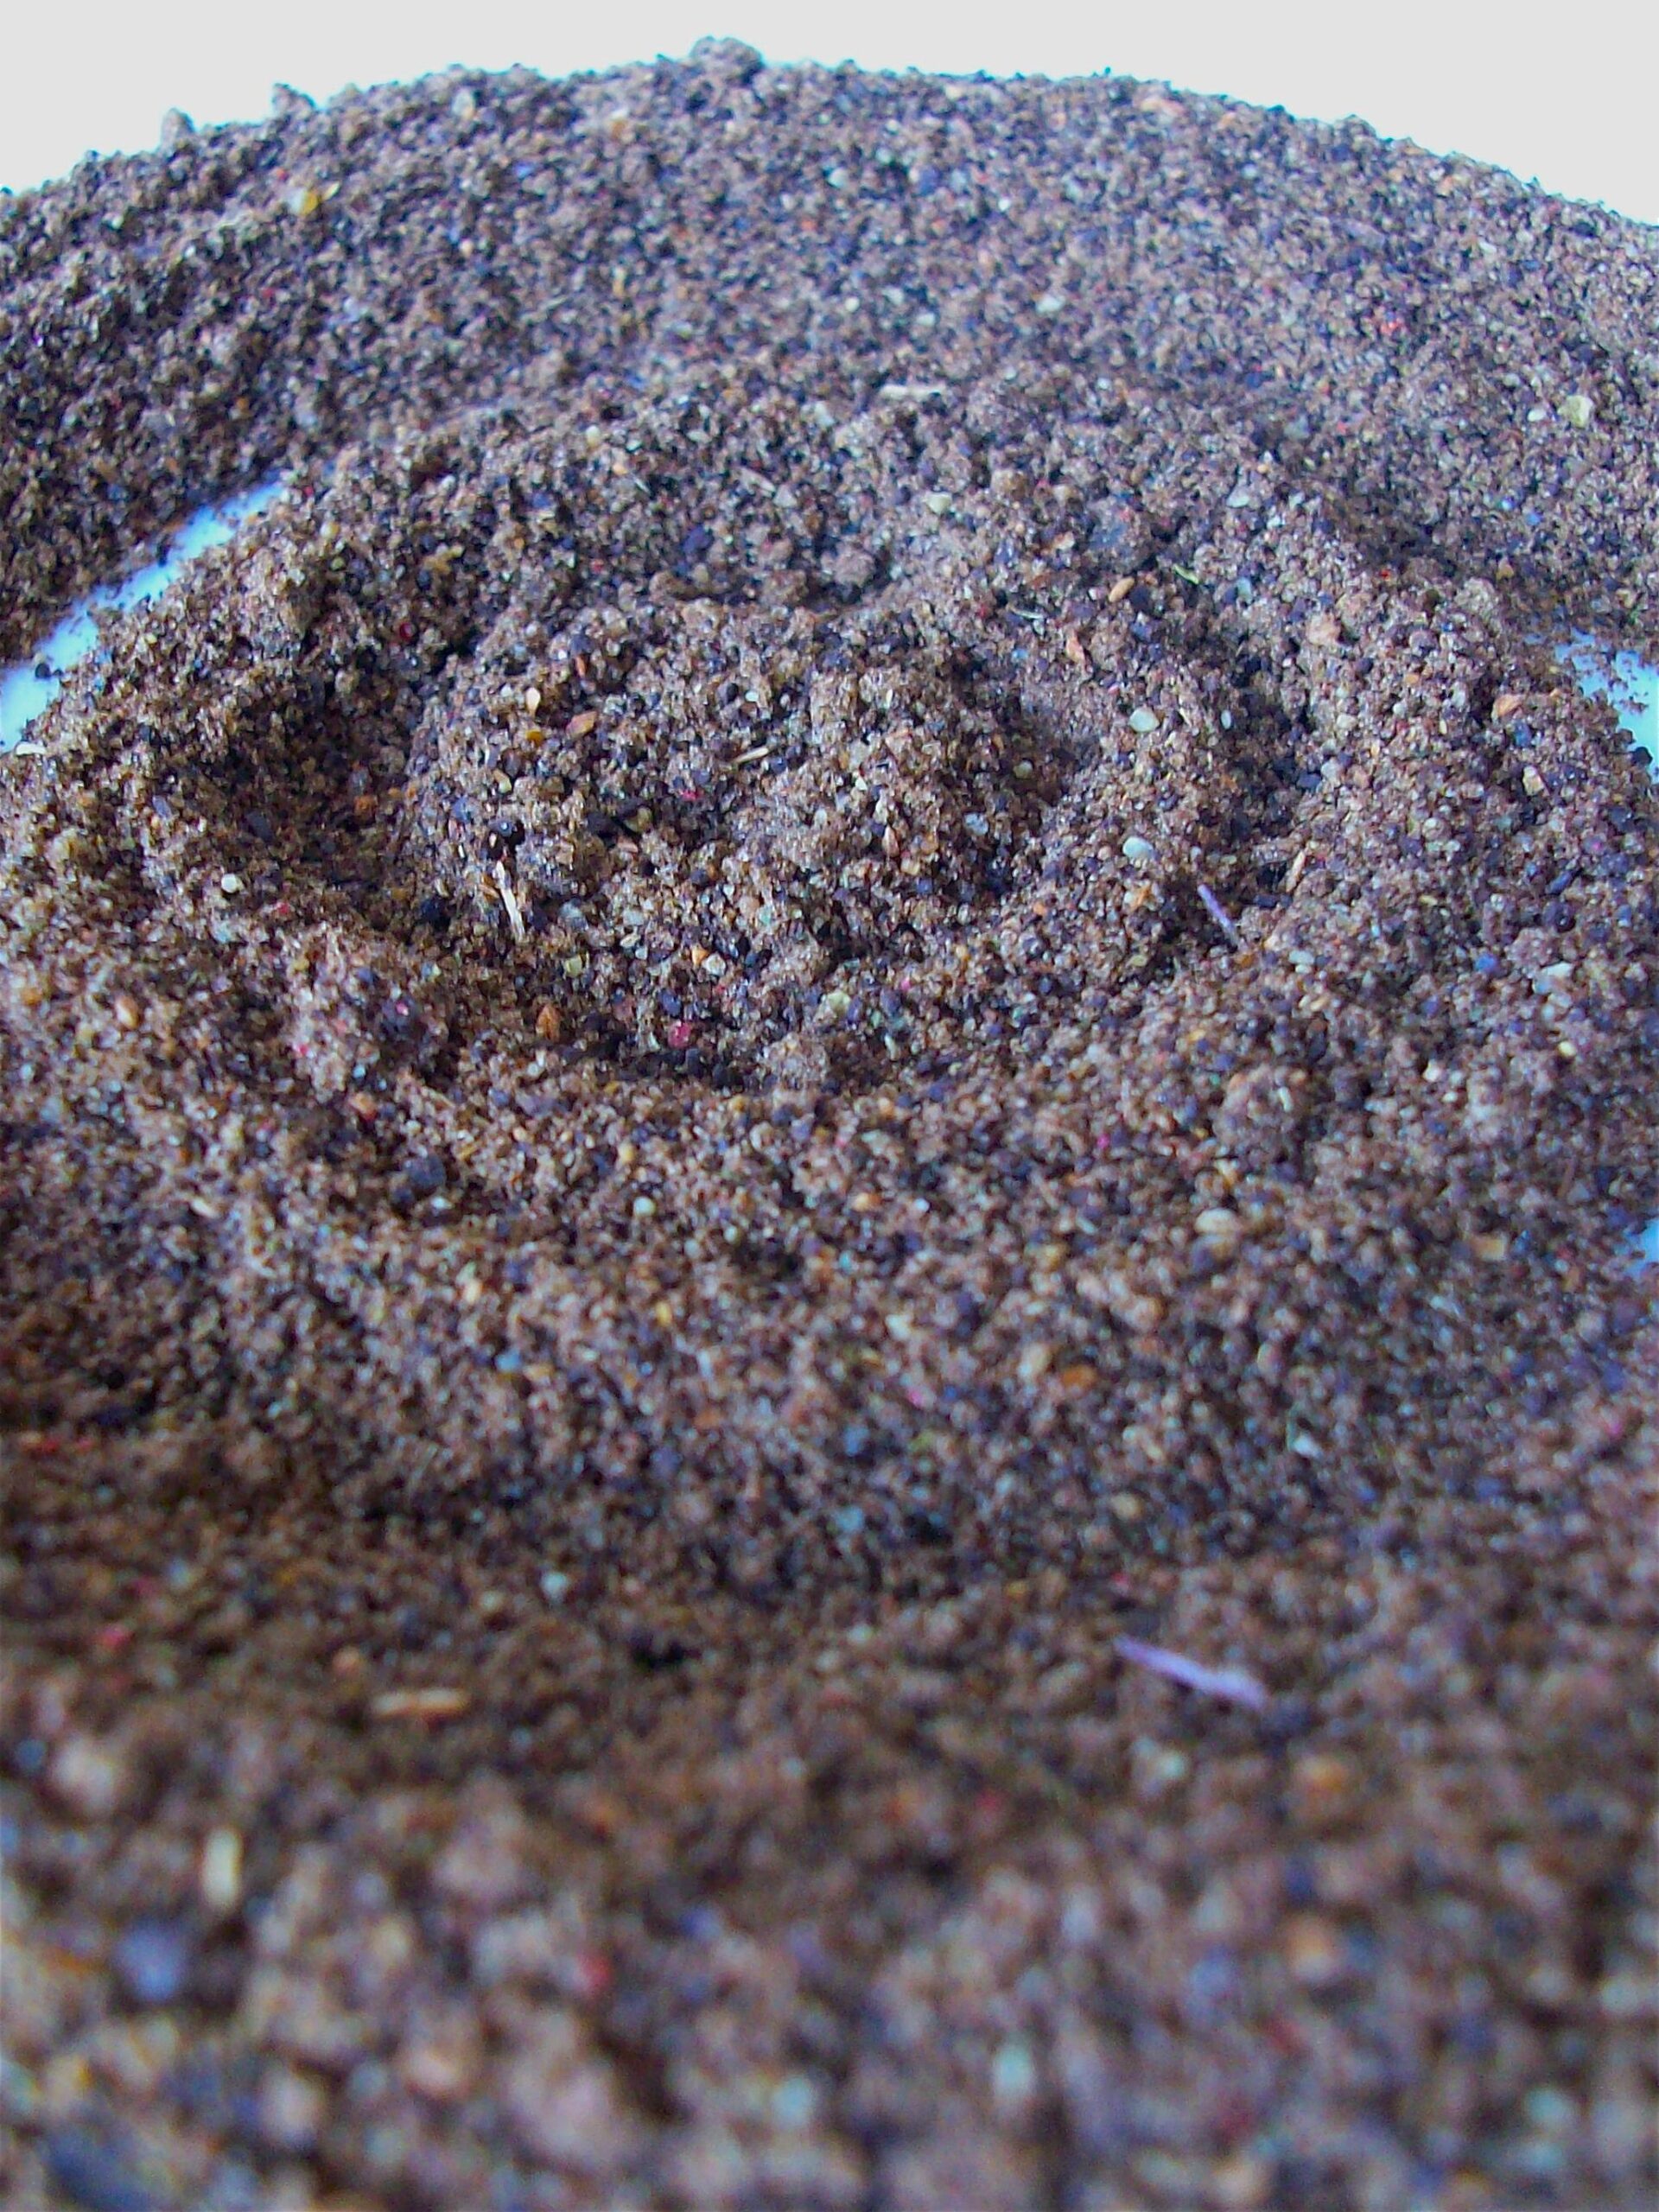 Aromatic Spiced Coffee Rub for Meat